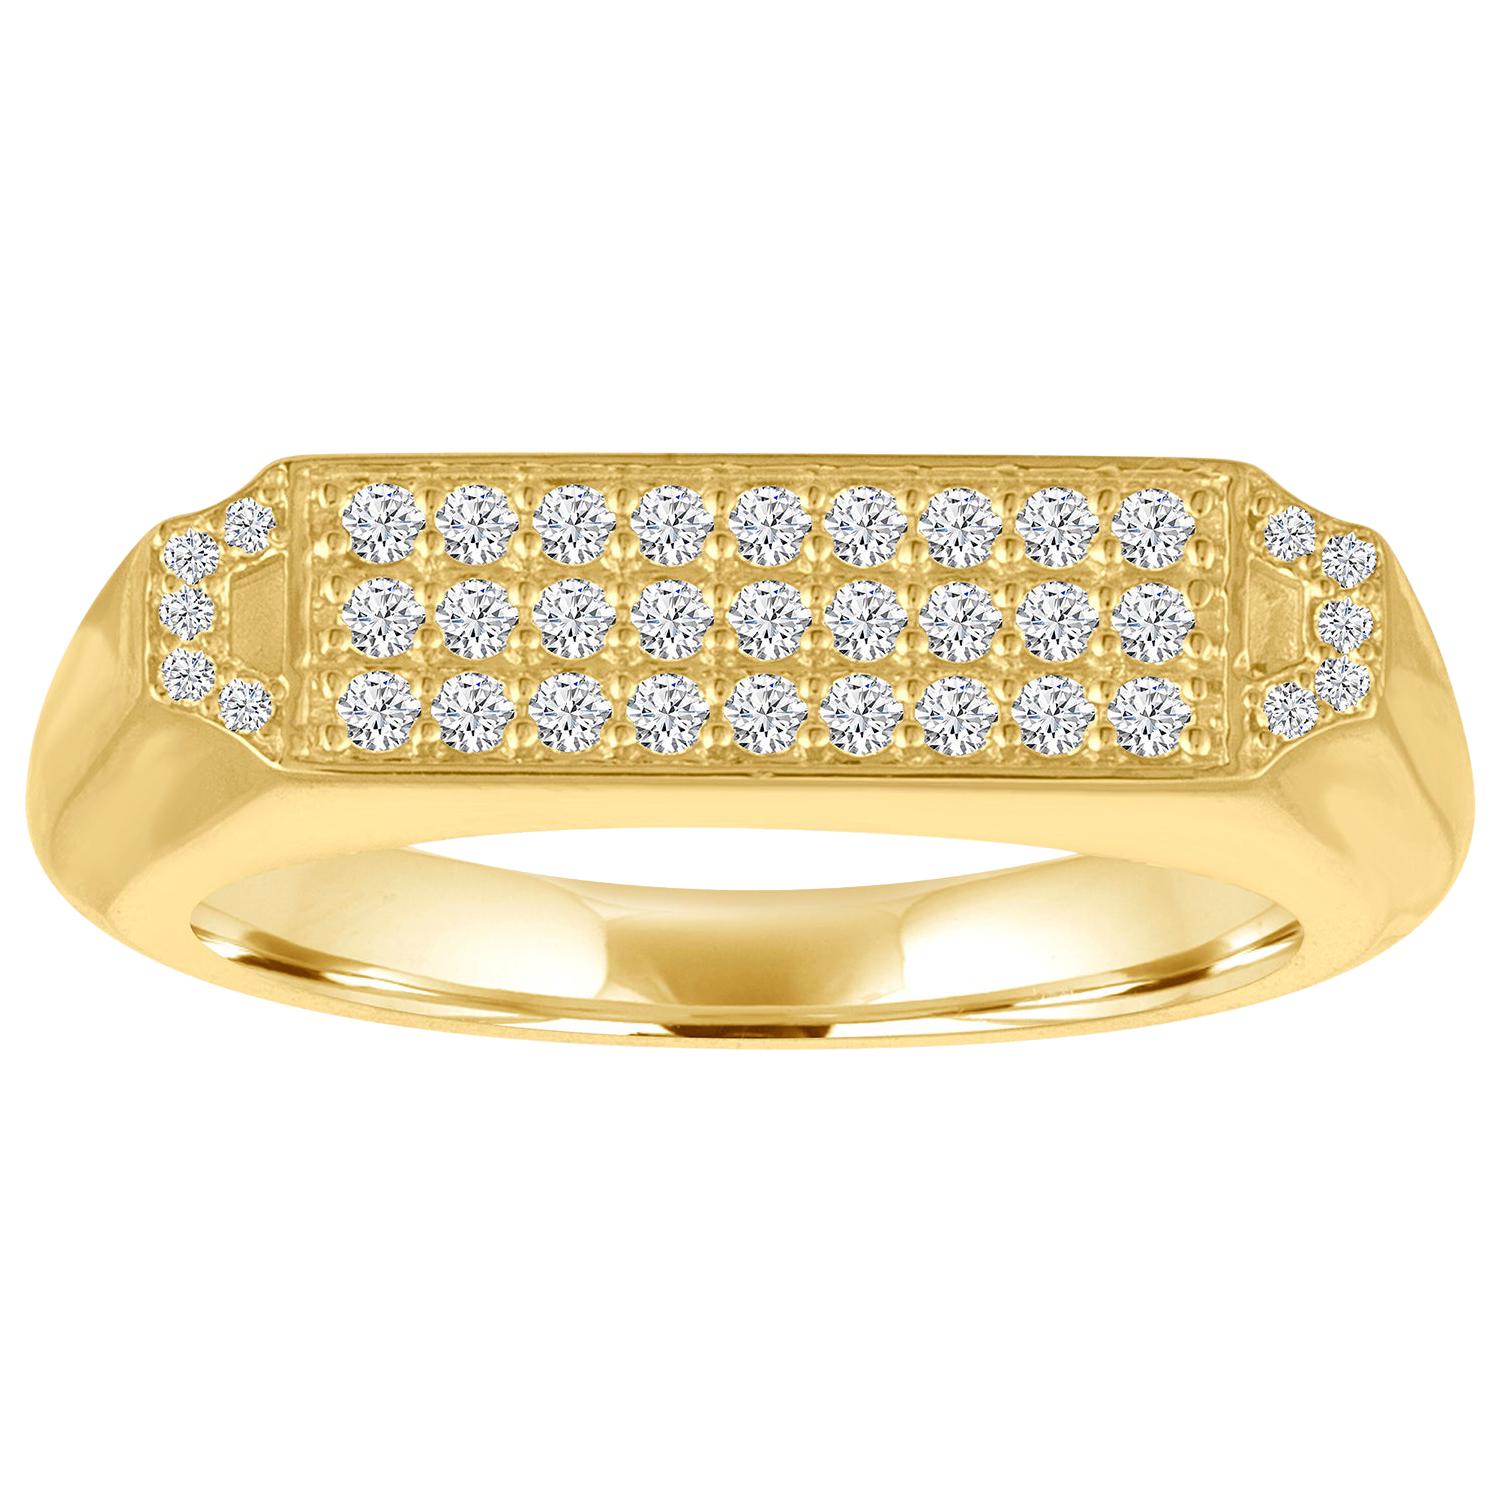 18 Karat Gold and Diamond Pave Deco Inspired Signet Ring